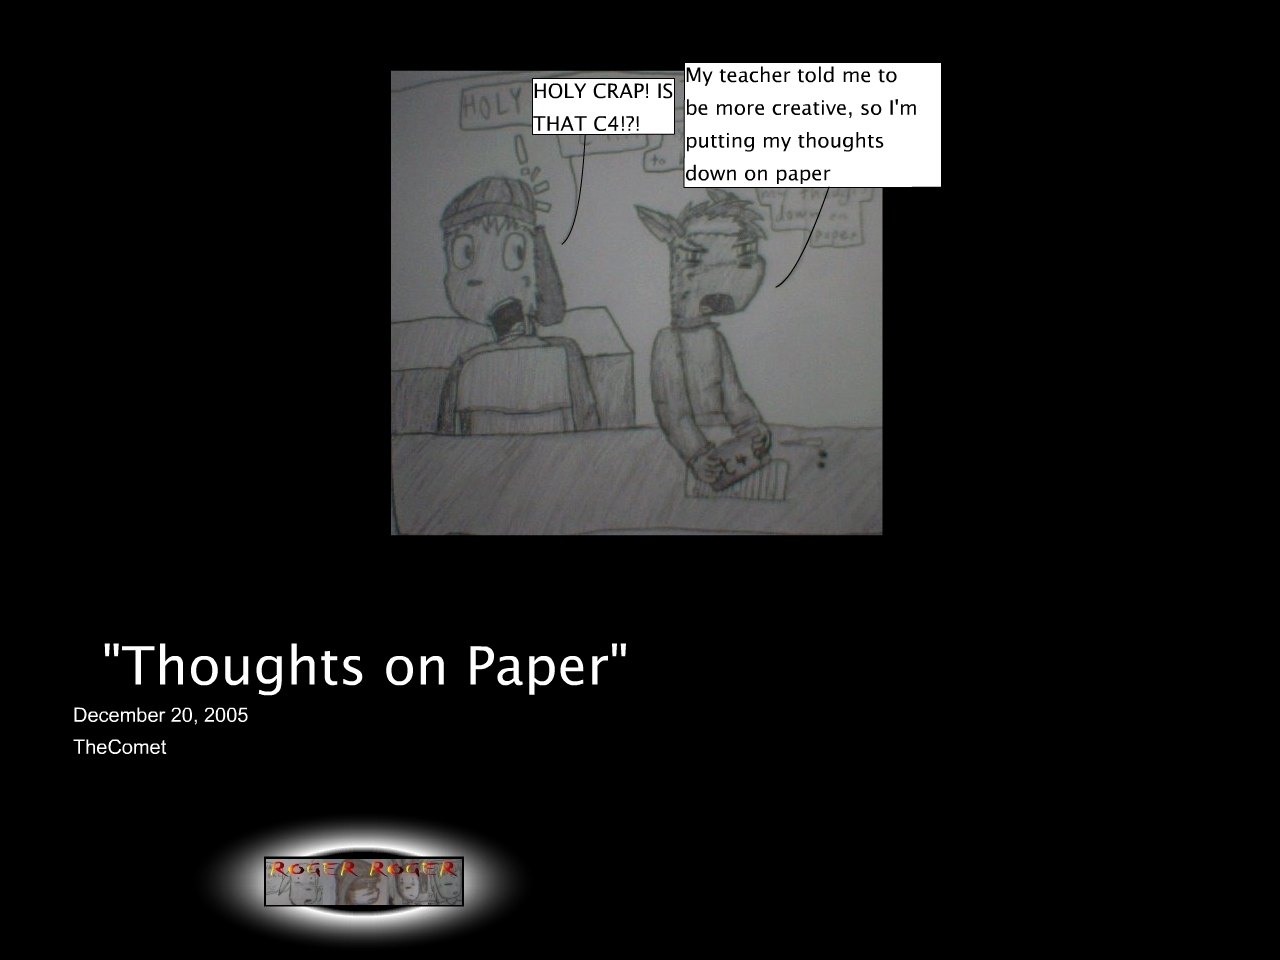 Roger Roger-Thoughts on Paper